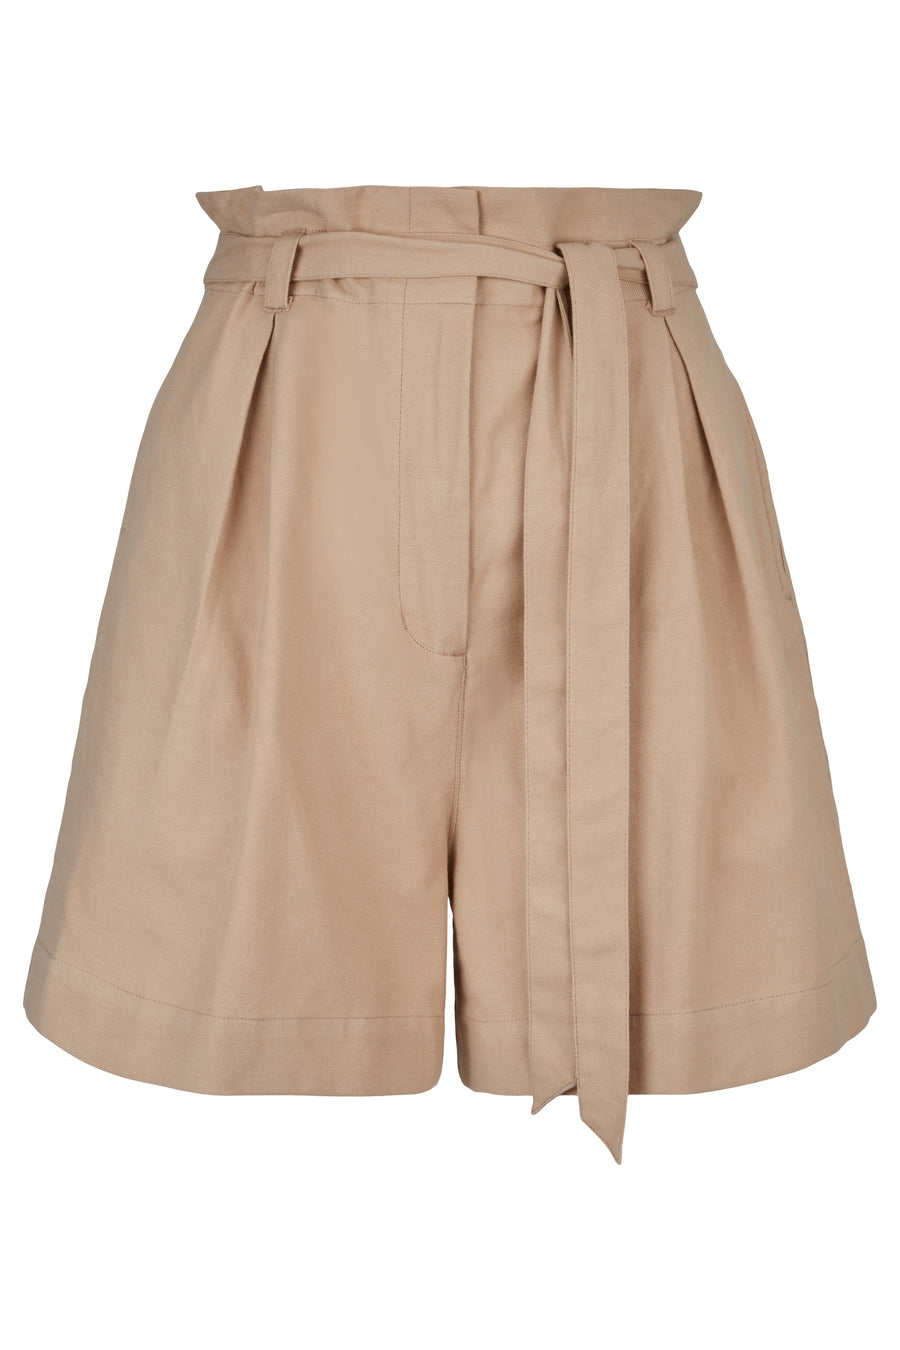 People Tree Fair Trade, Ethical & Sustainable Dorcas Shorts in Sand 100% Organic Cotton